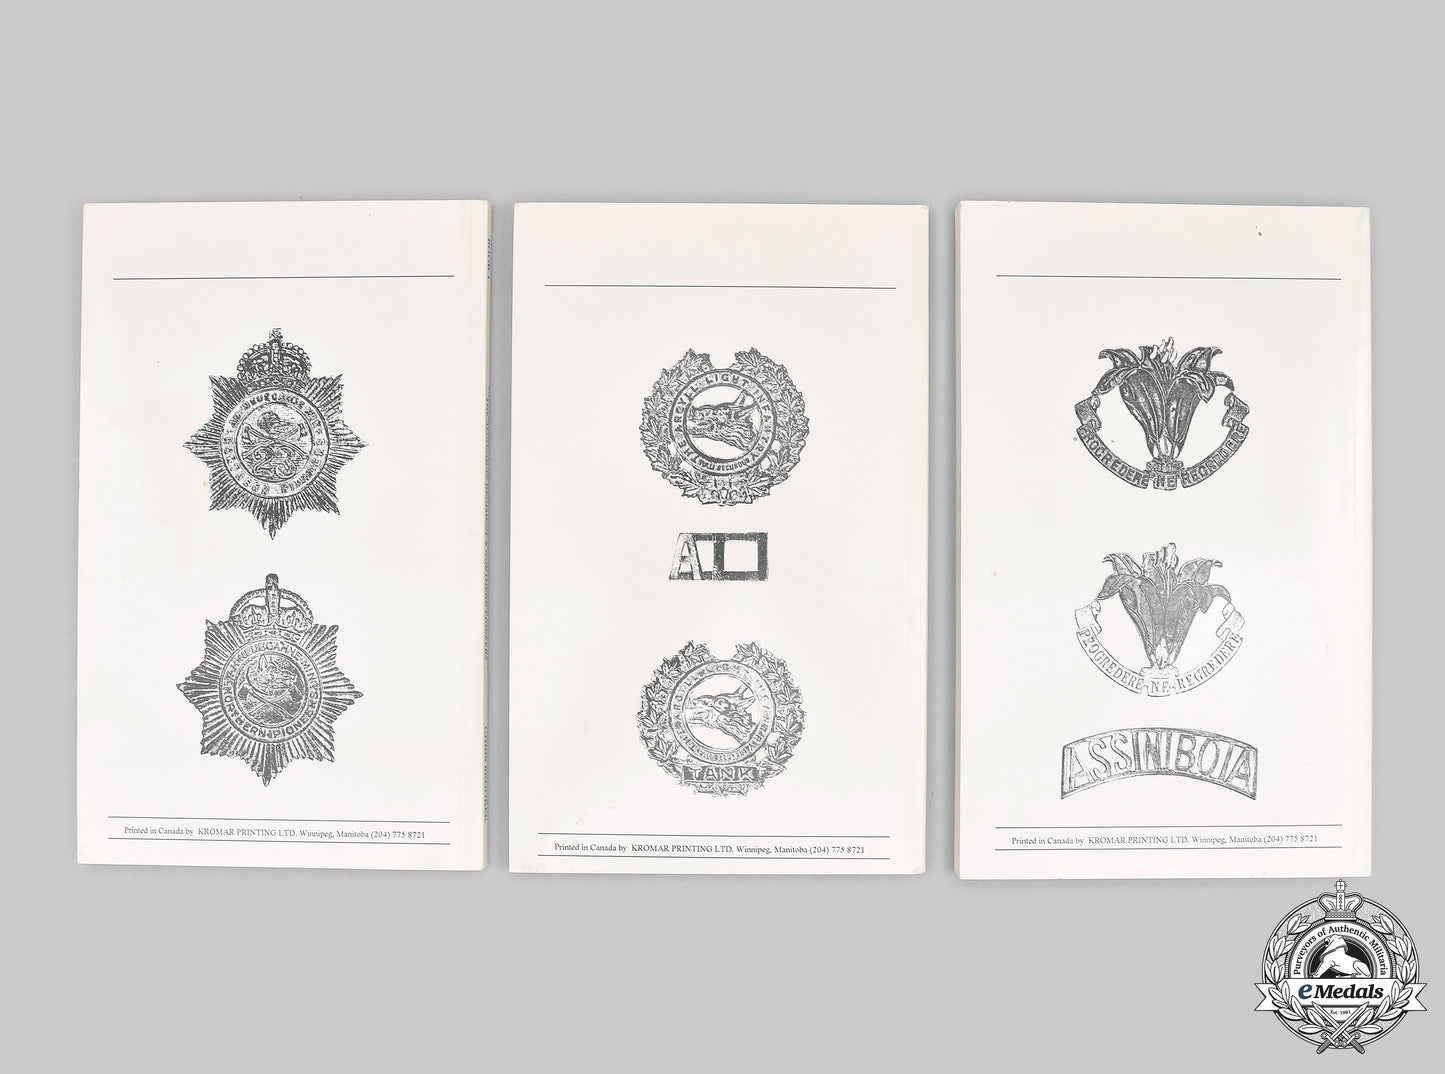 canada._the_standard_catalogue_of_canadian_army_badges1855_to_date,_books1,2&3__mnc5690_m20_0687